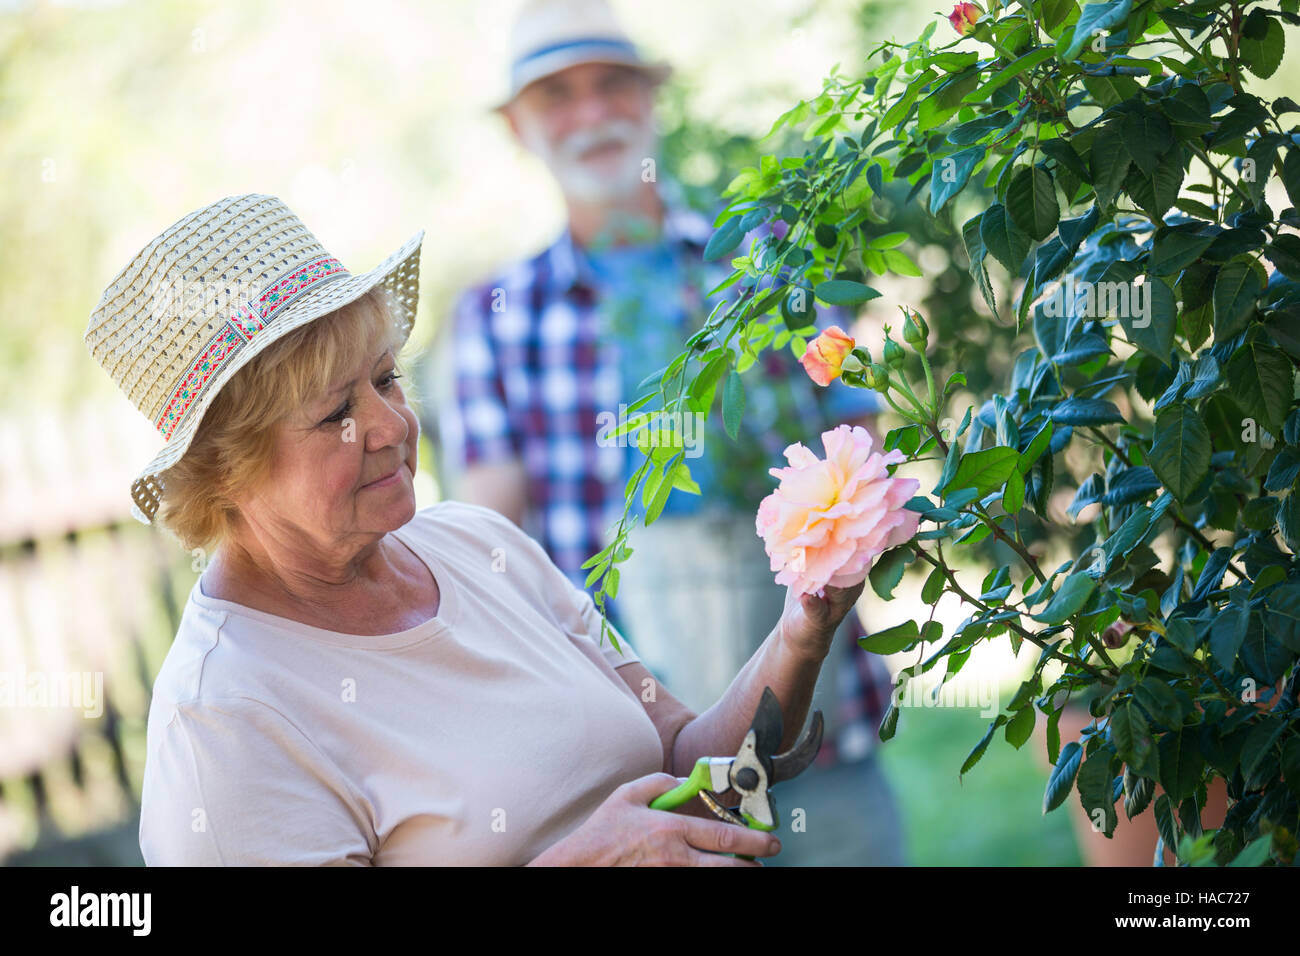 Senior woman cutting flower with pruning shears Stock Photo